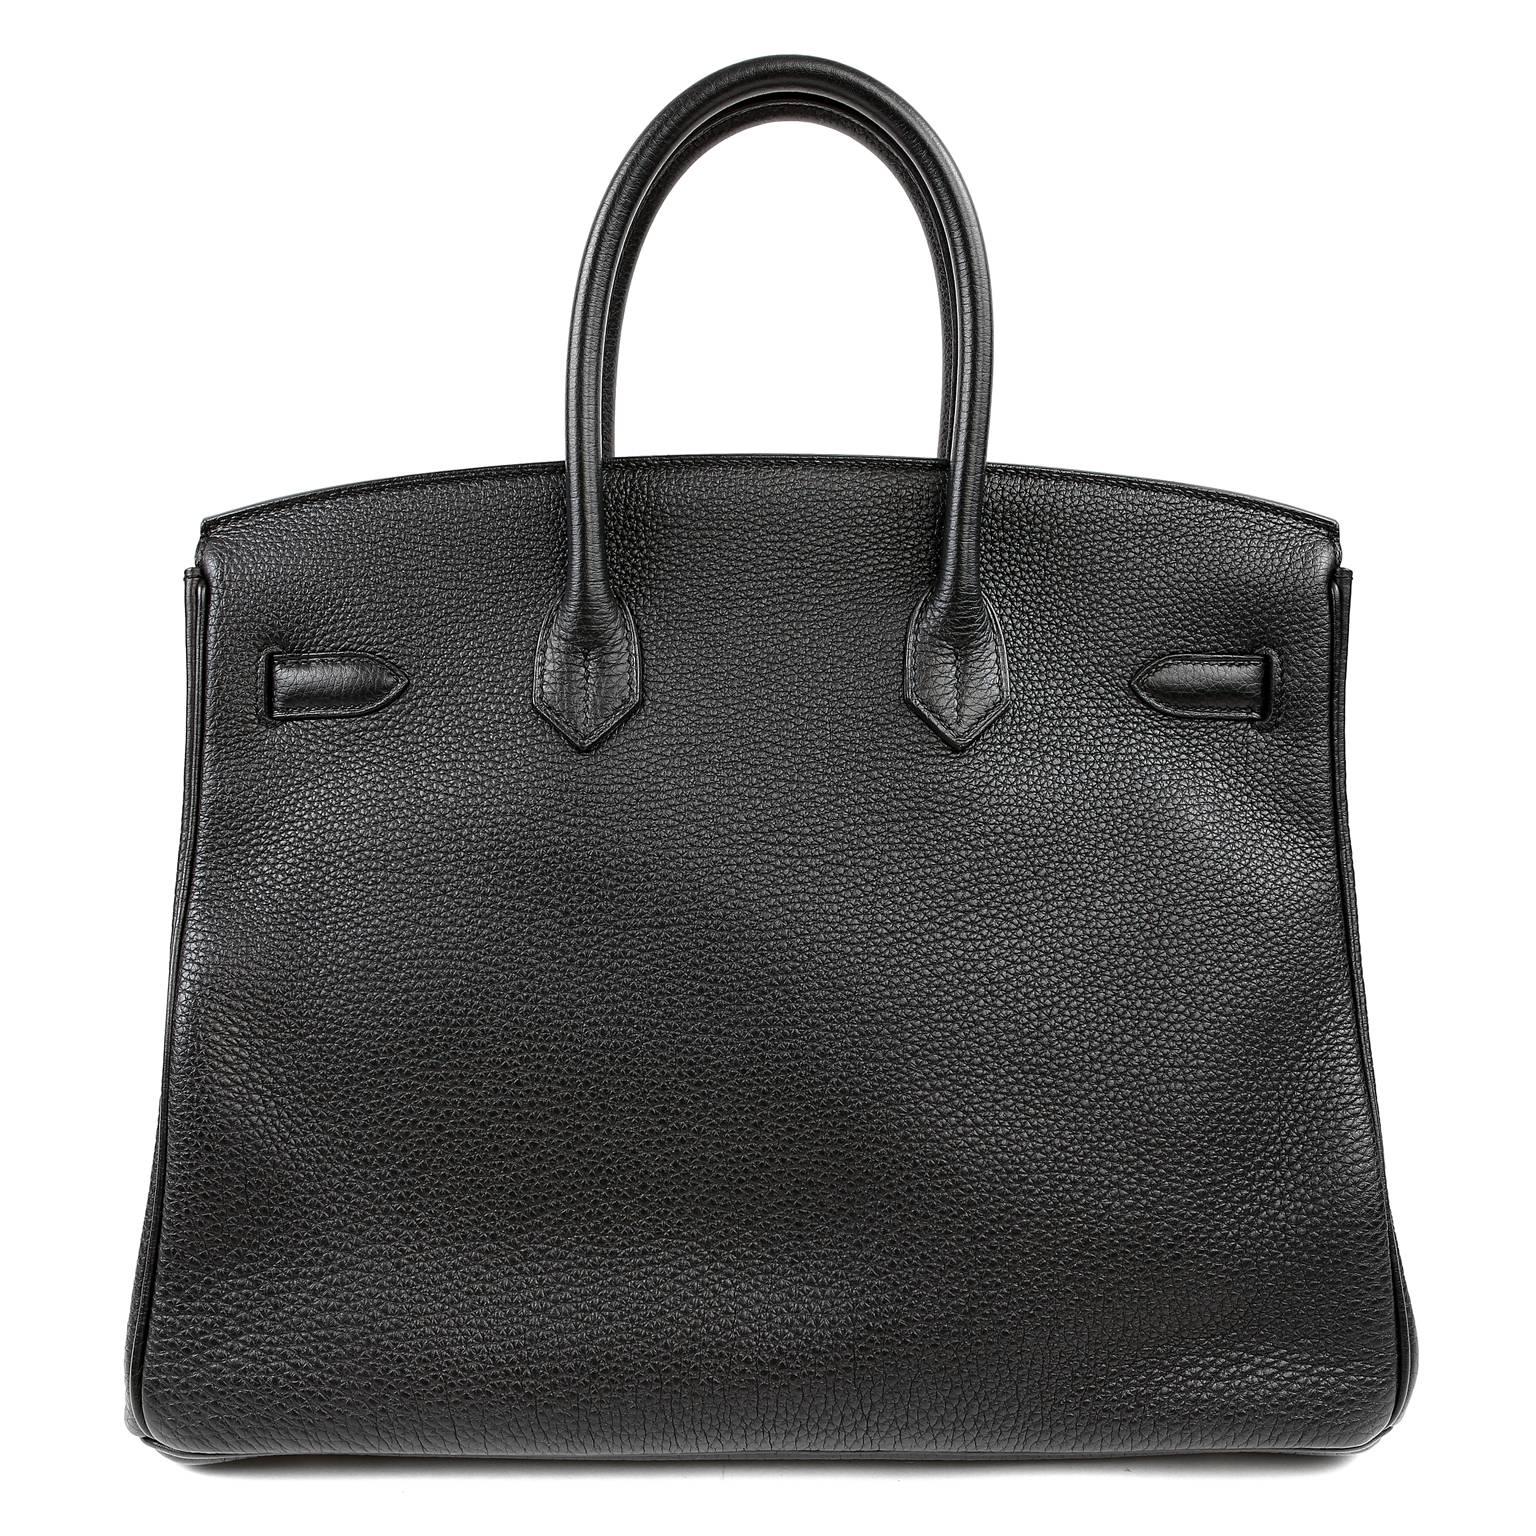 Hermès Black 35 cm  Togo Birkin Bag is in mint condition. 
Long waitlists are commonplace for the intensely coveted Birkin.  Each piece is hand crafted by skilled artisans and represents the epitome of fashion luxury.  
 
Scratch resistant Black